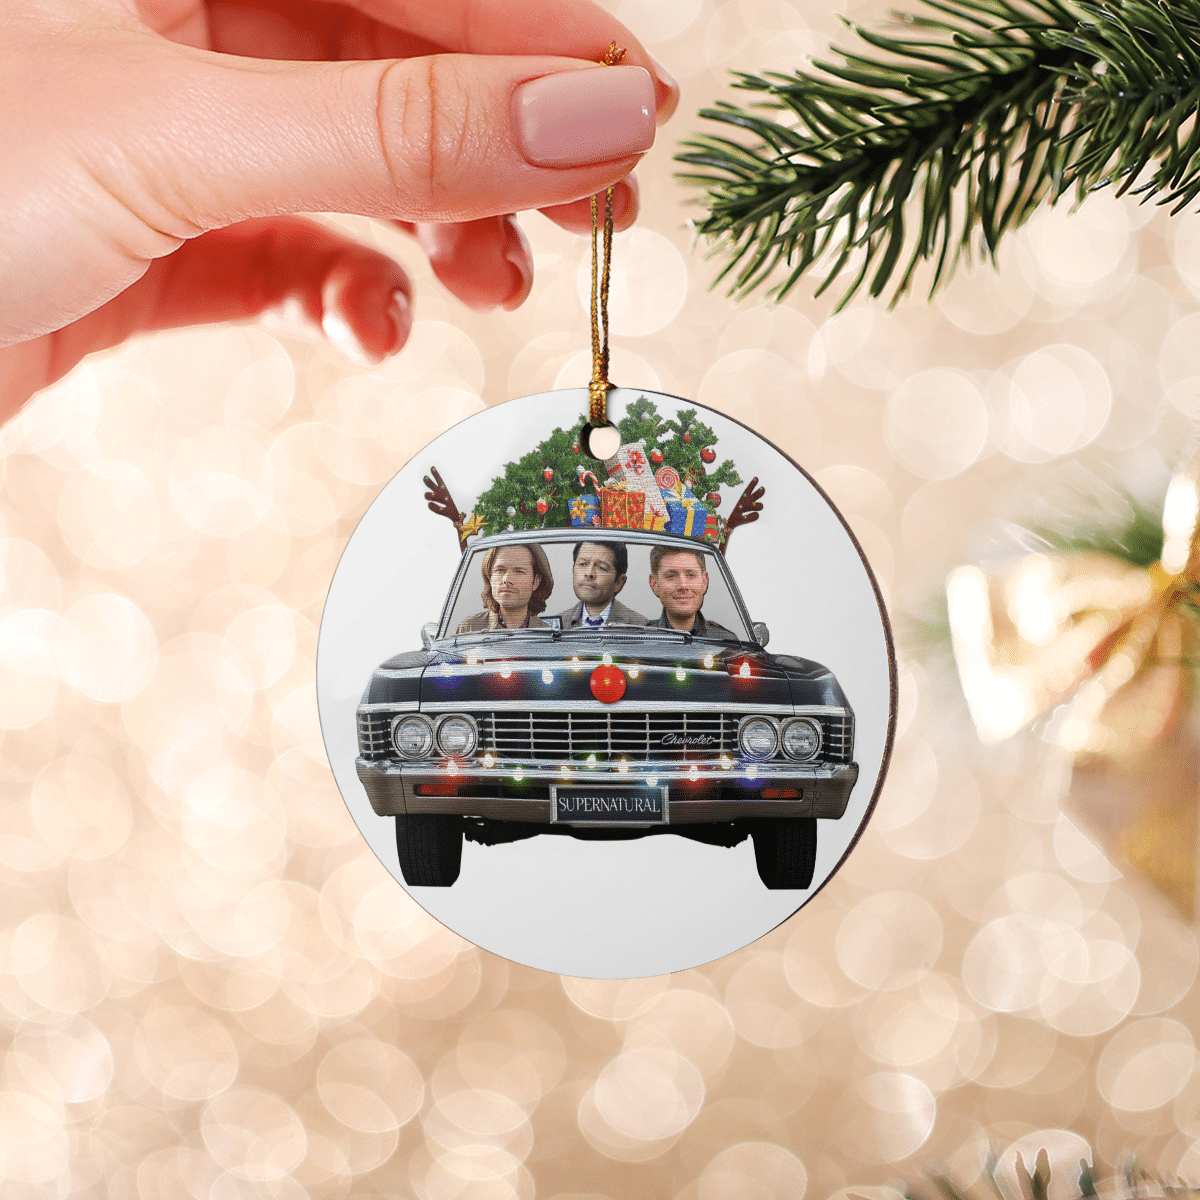 Merry Christmas Style Ornament